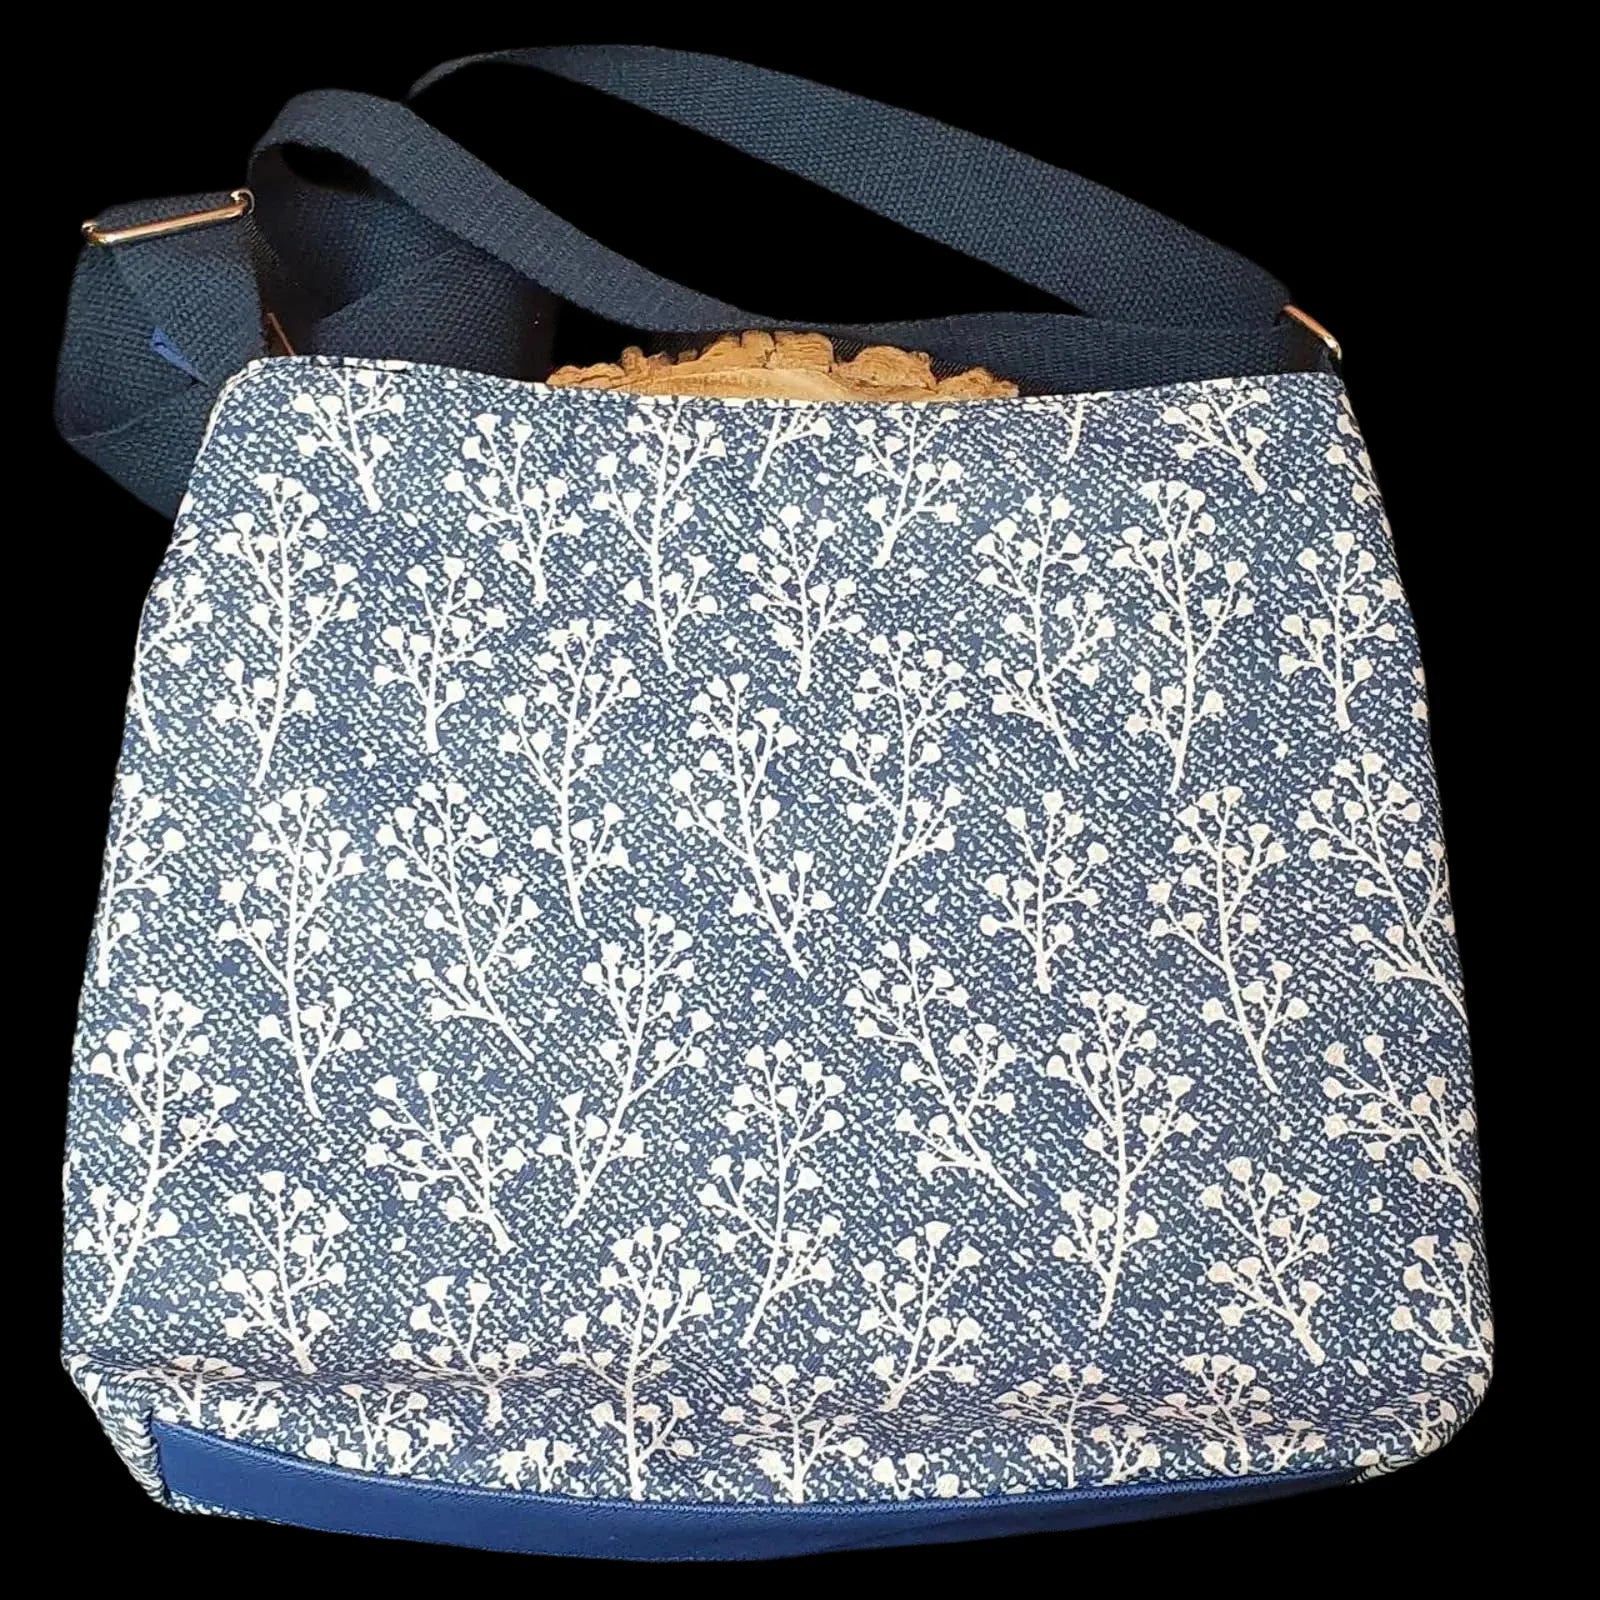 Womens Blue Floral Bag - Bags - Unbranded - 2 - 315